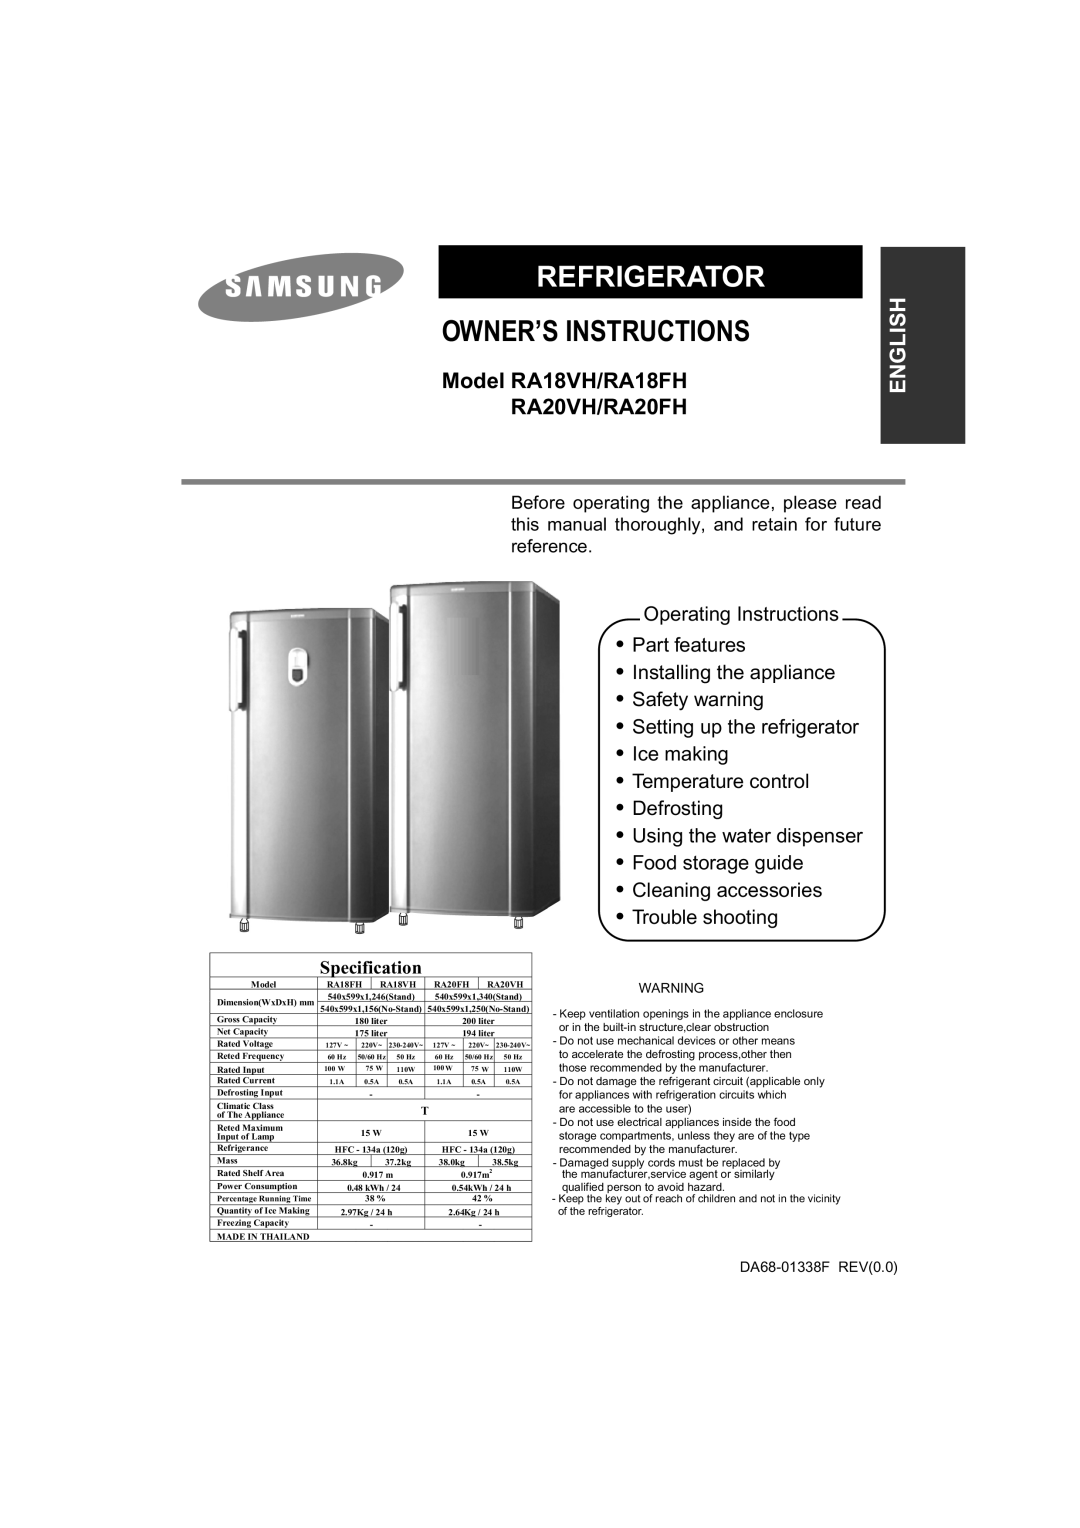 Samsung RA18FH manual Operating Instructions Part features Installing the appliance, Refrigerator Owner’S Instructions 